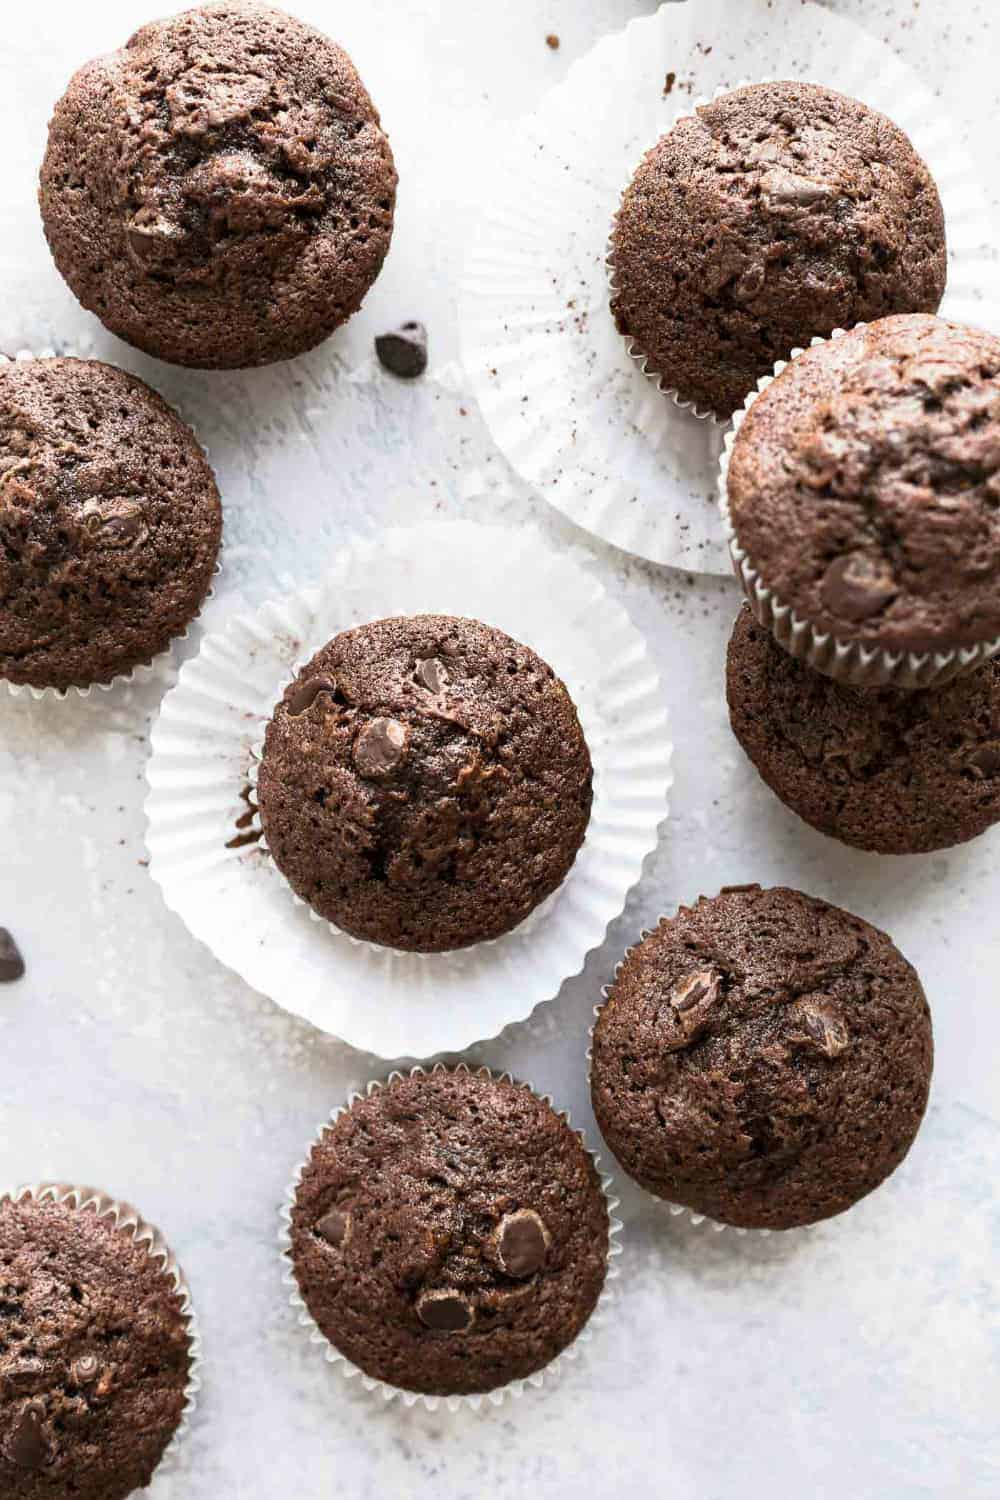 Overhead view of baked chocolate zucchini muffins